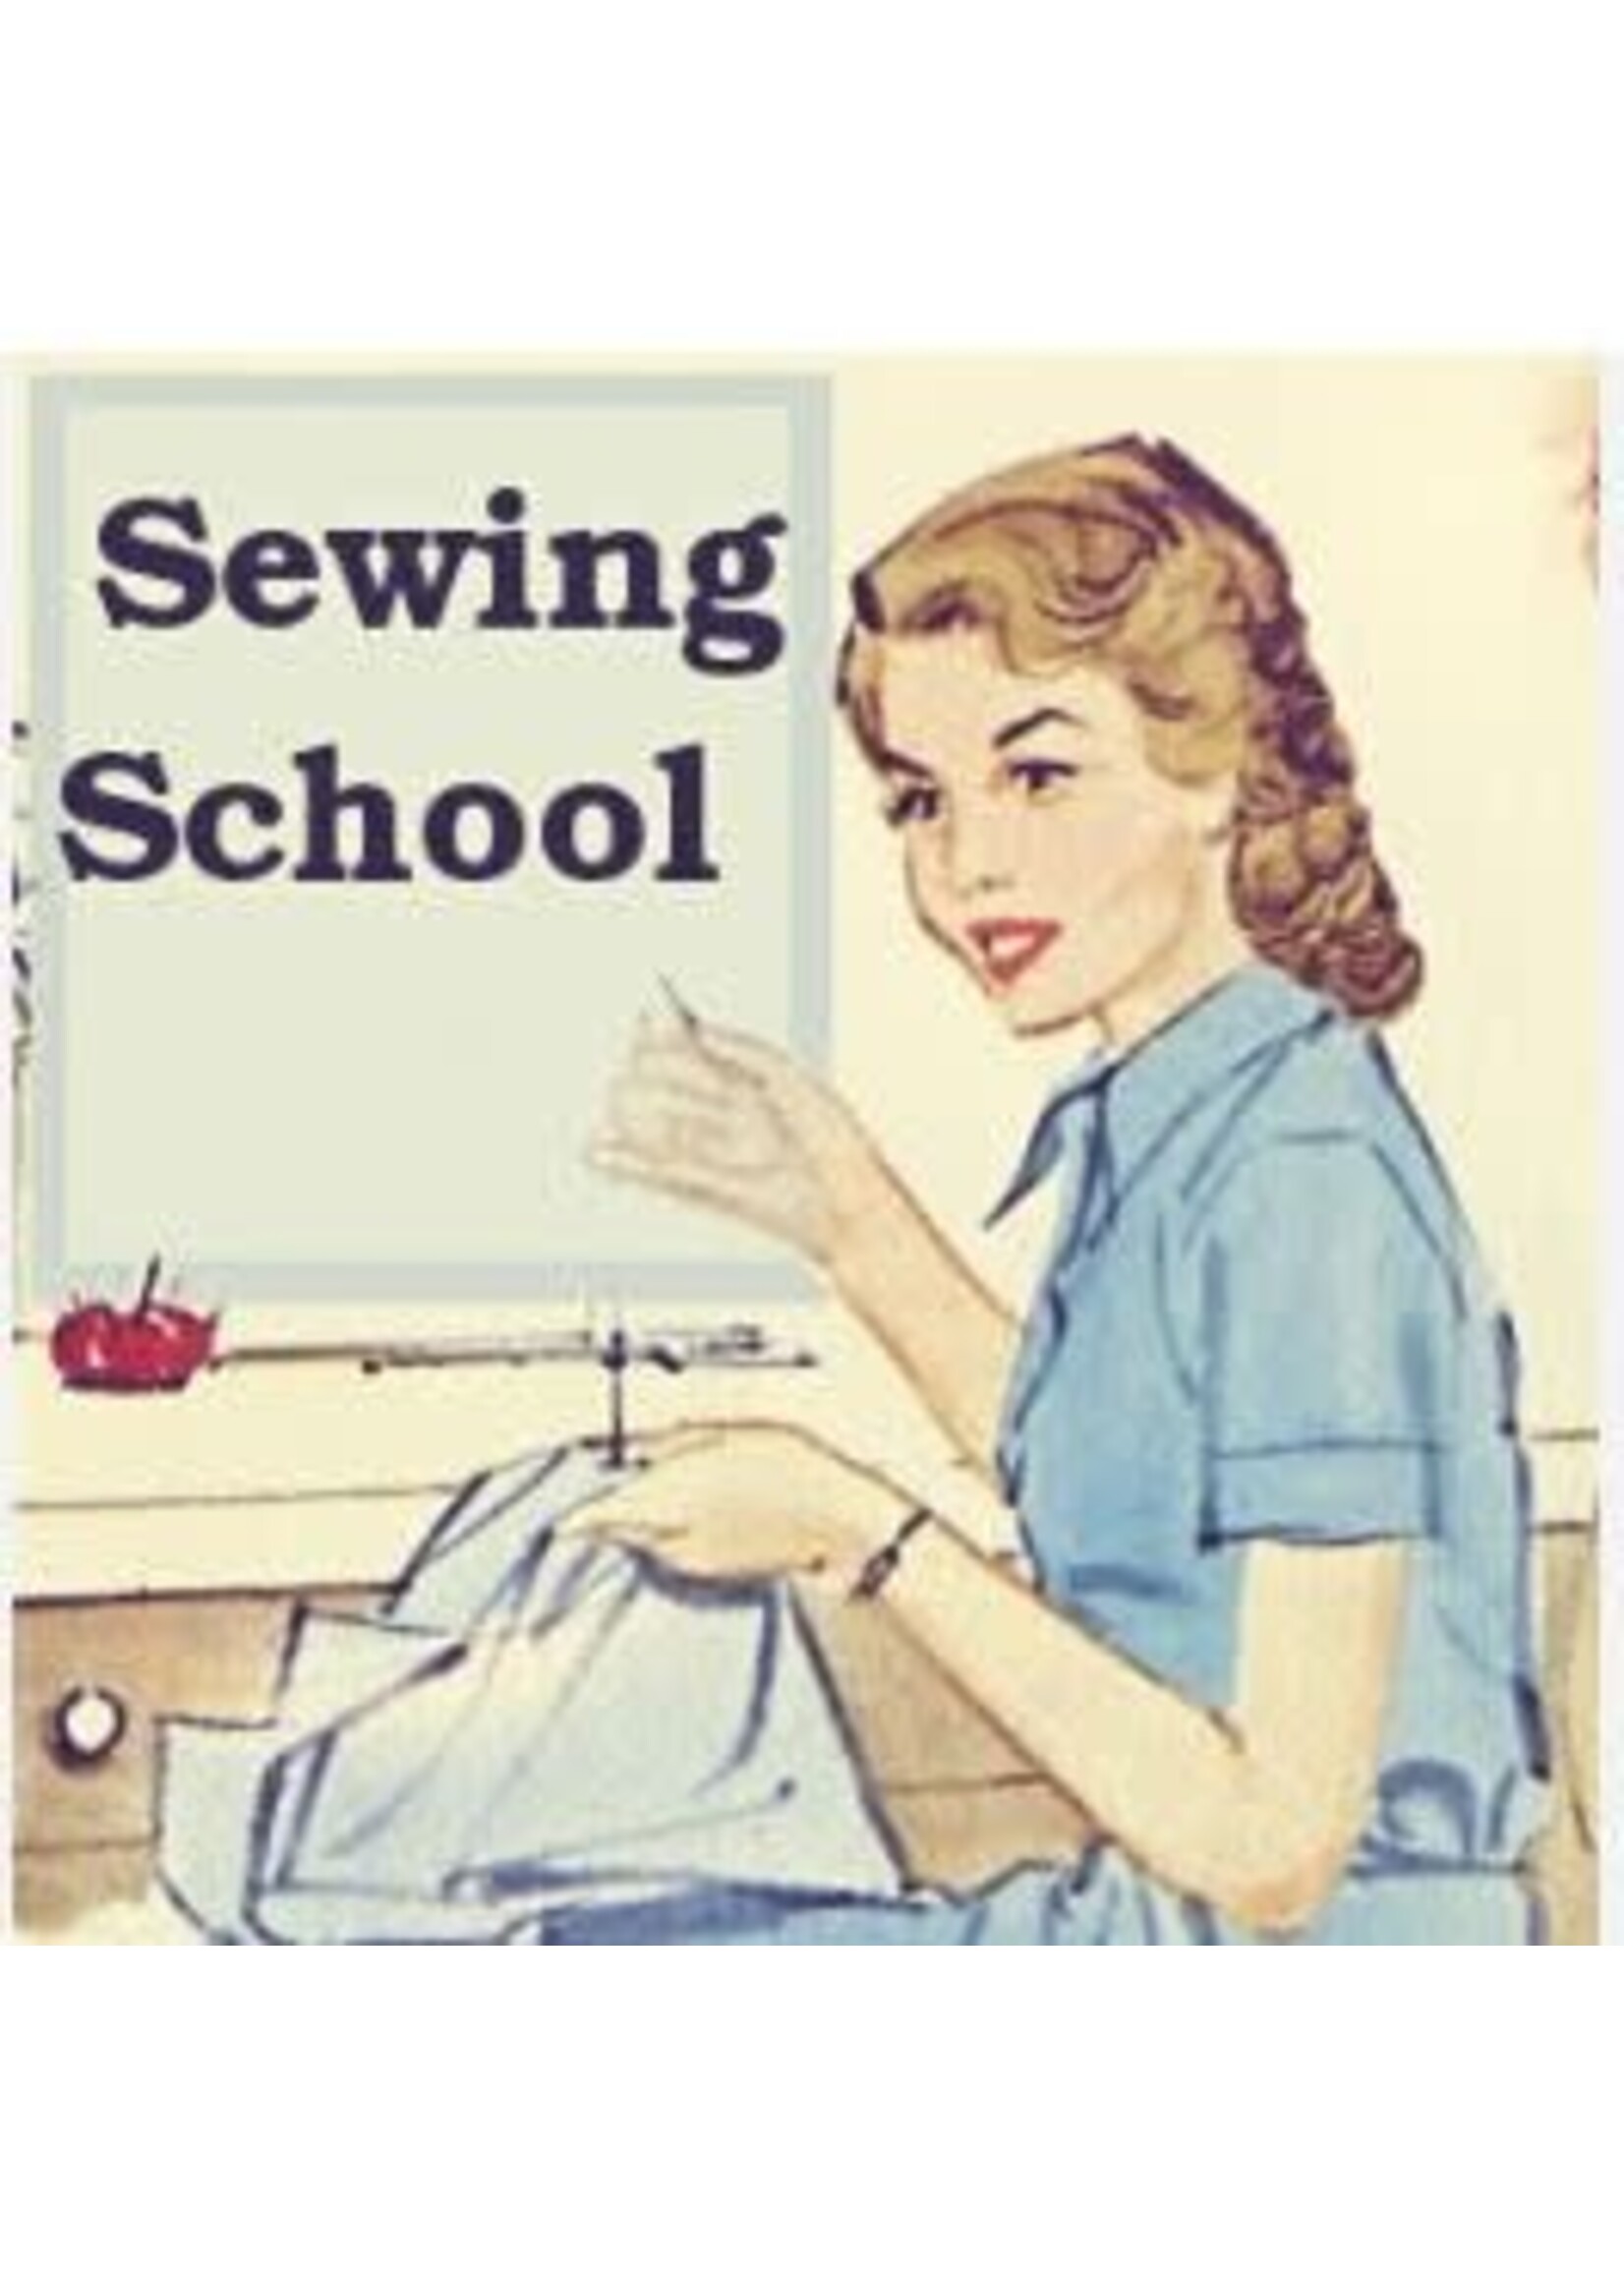 Beginners Sewing May 16, 23,30 and June 6 - 6:30 - 9:30 pm